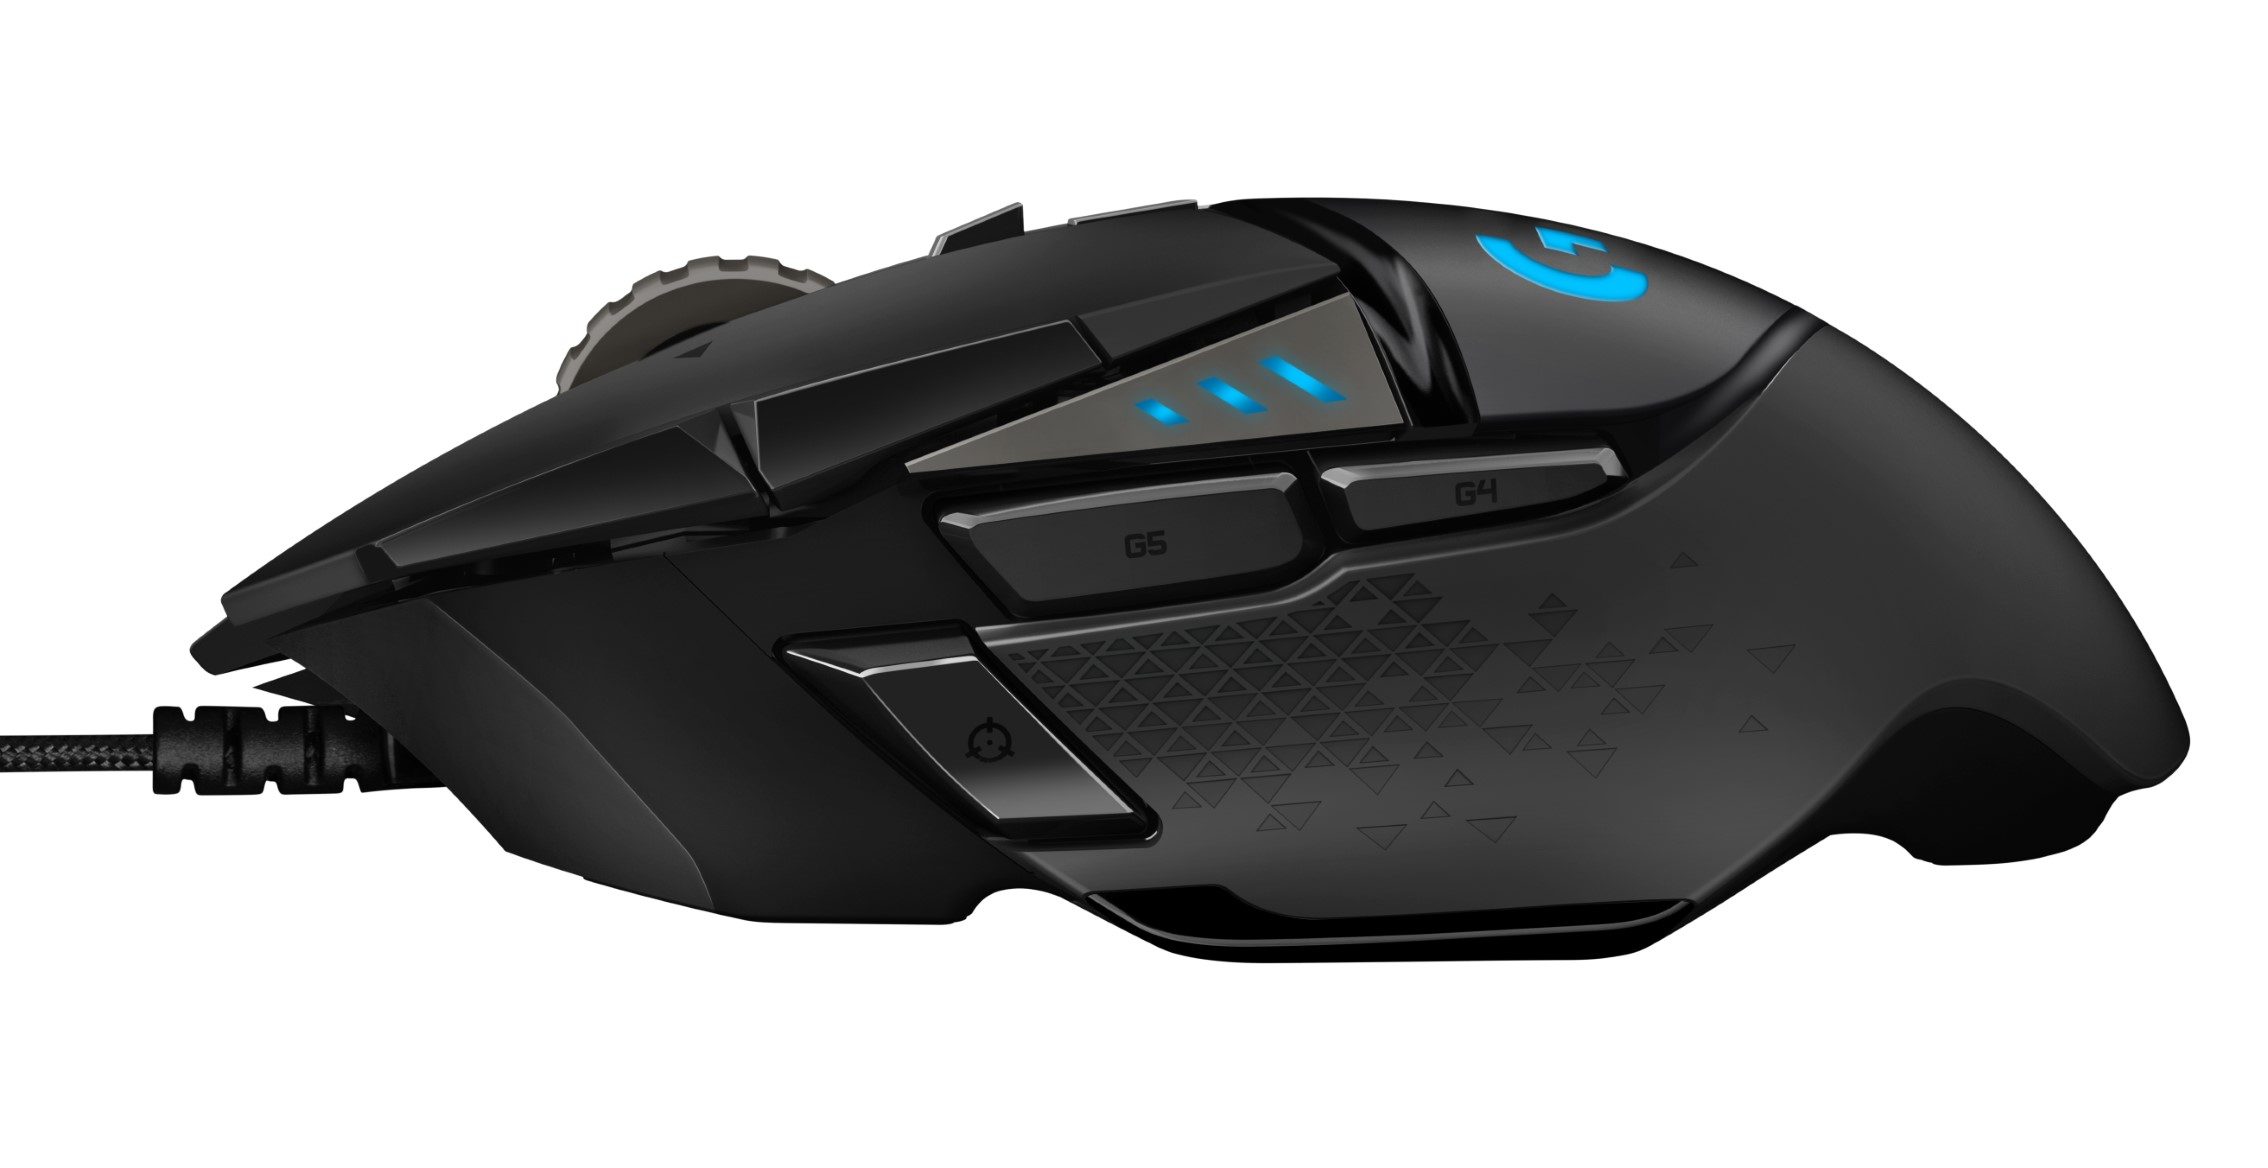 Logitech G502 HERO Becomes World's Best Selling Gaming Mouse